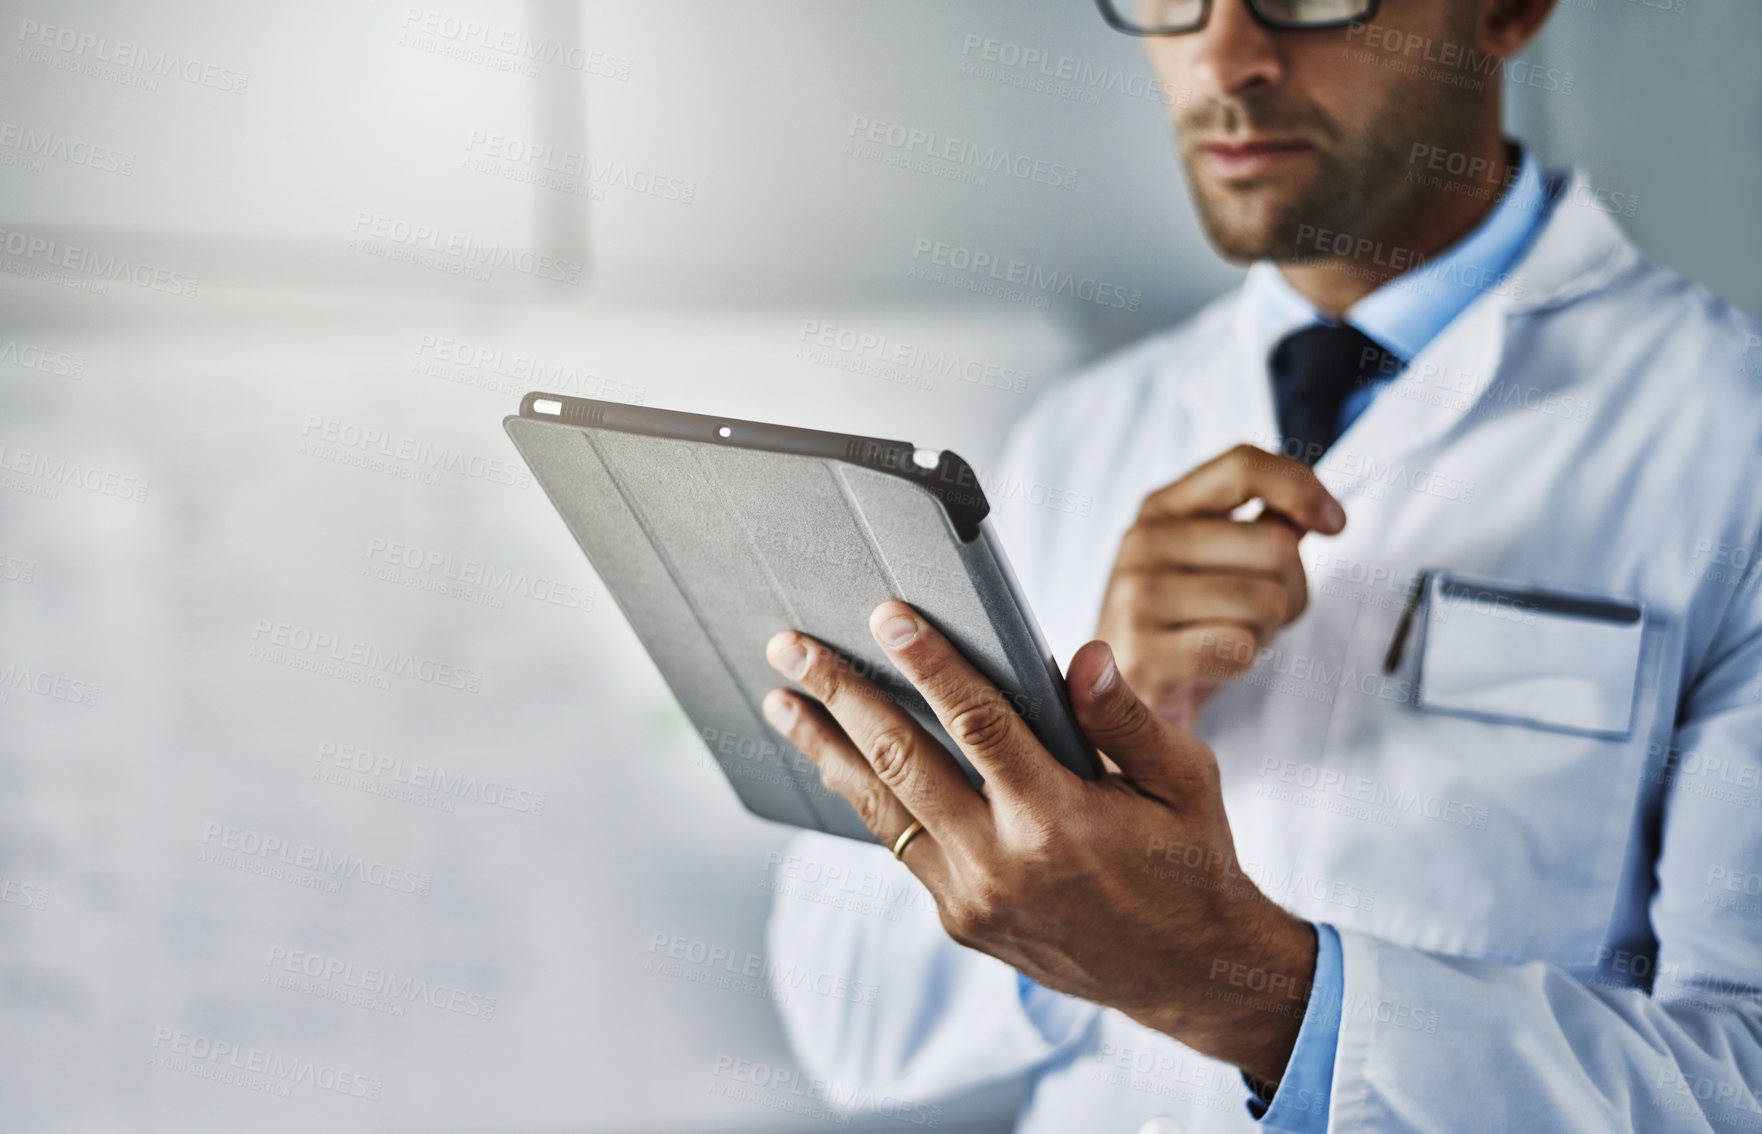 Buy stock photo Closeup shot of an unrecognizable doctor working on a digital tablet